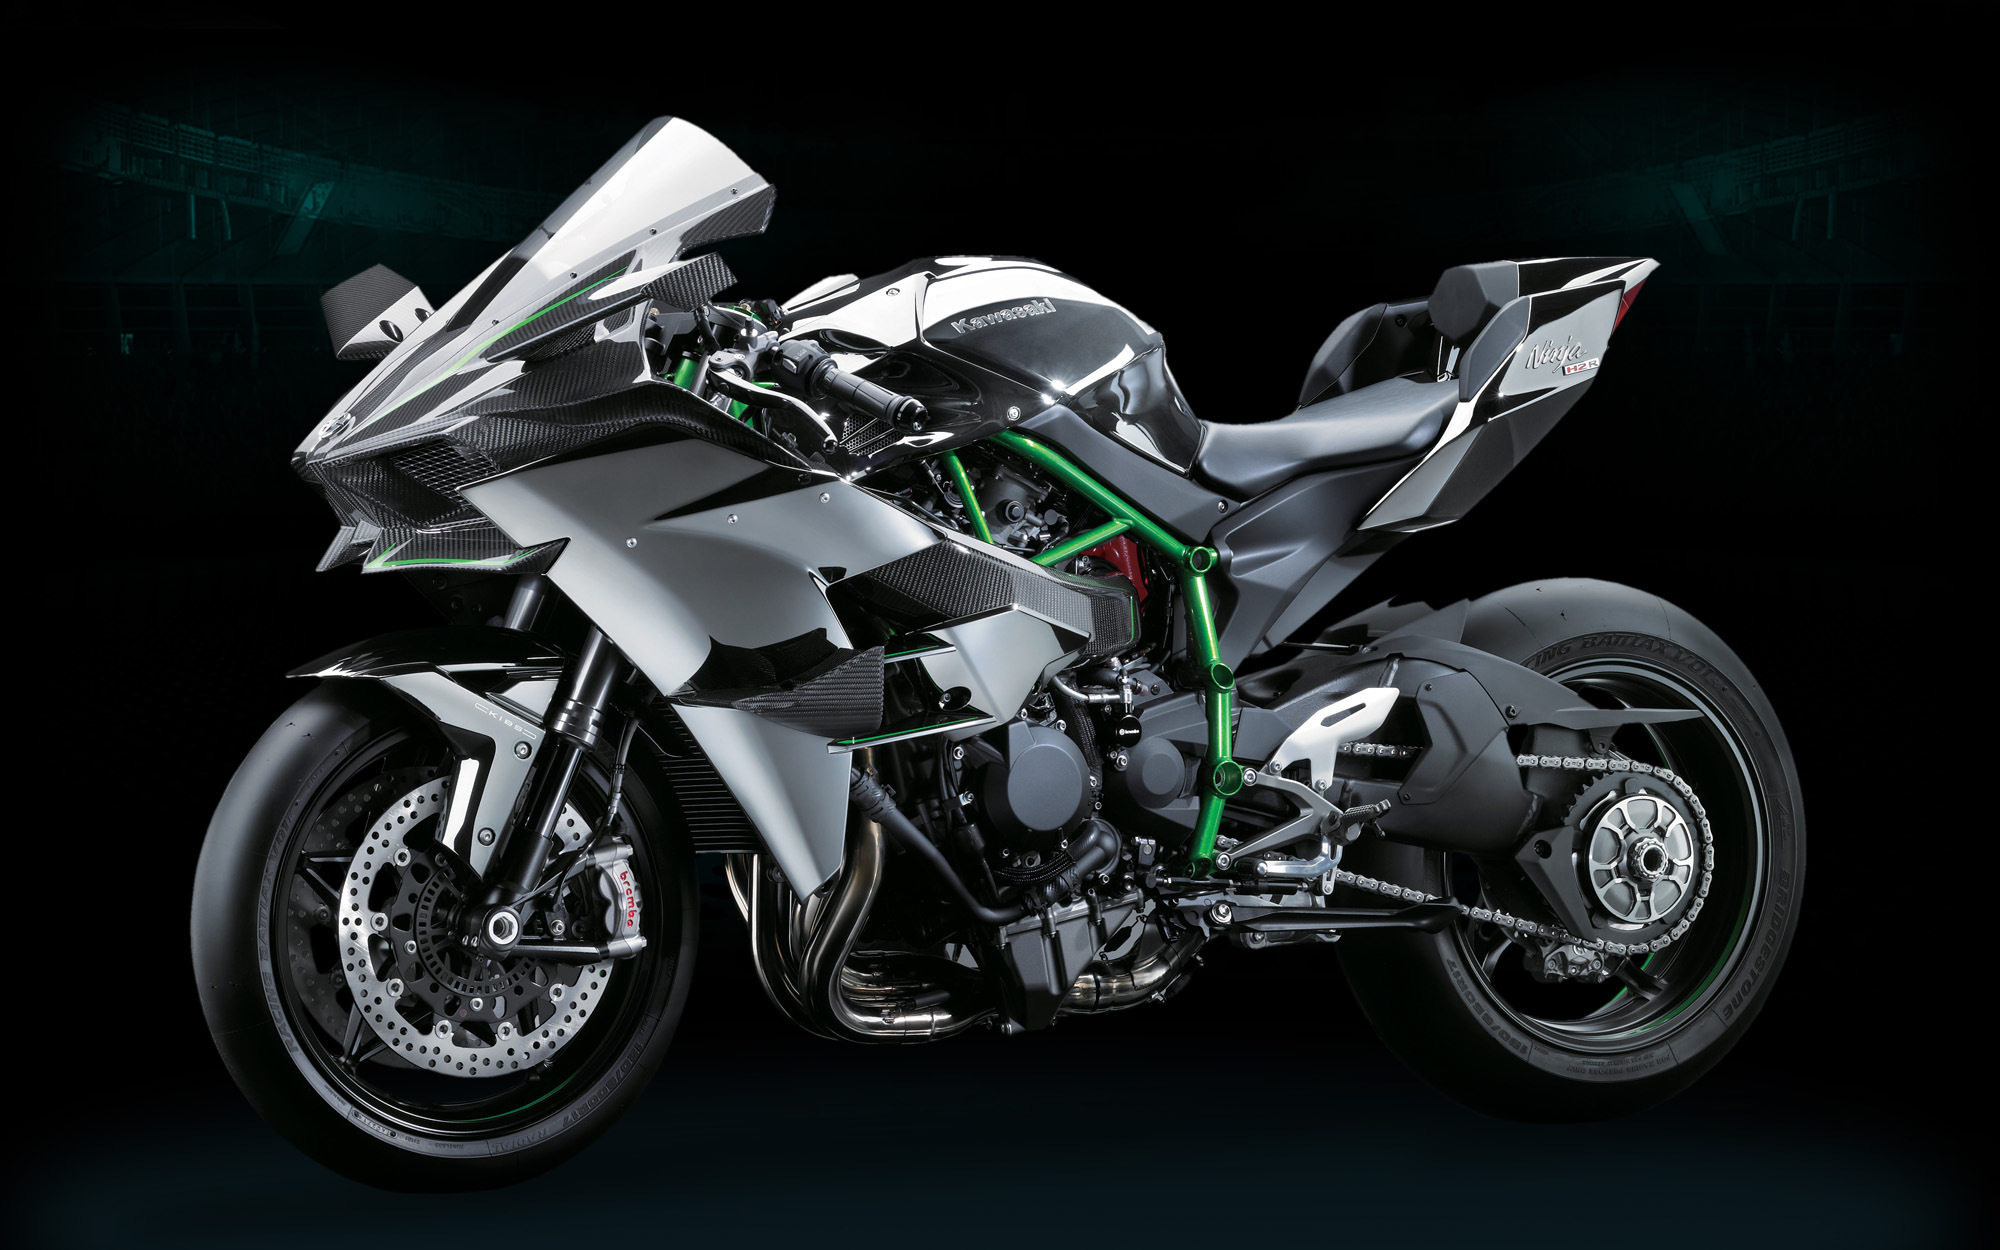 Lunchtime debate: Is Kawasaki H2 inspired or insane?